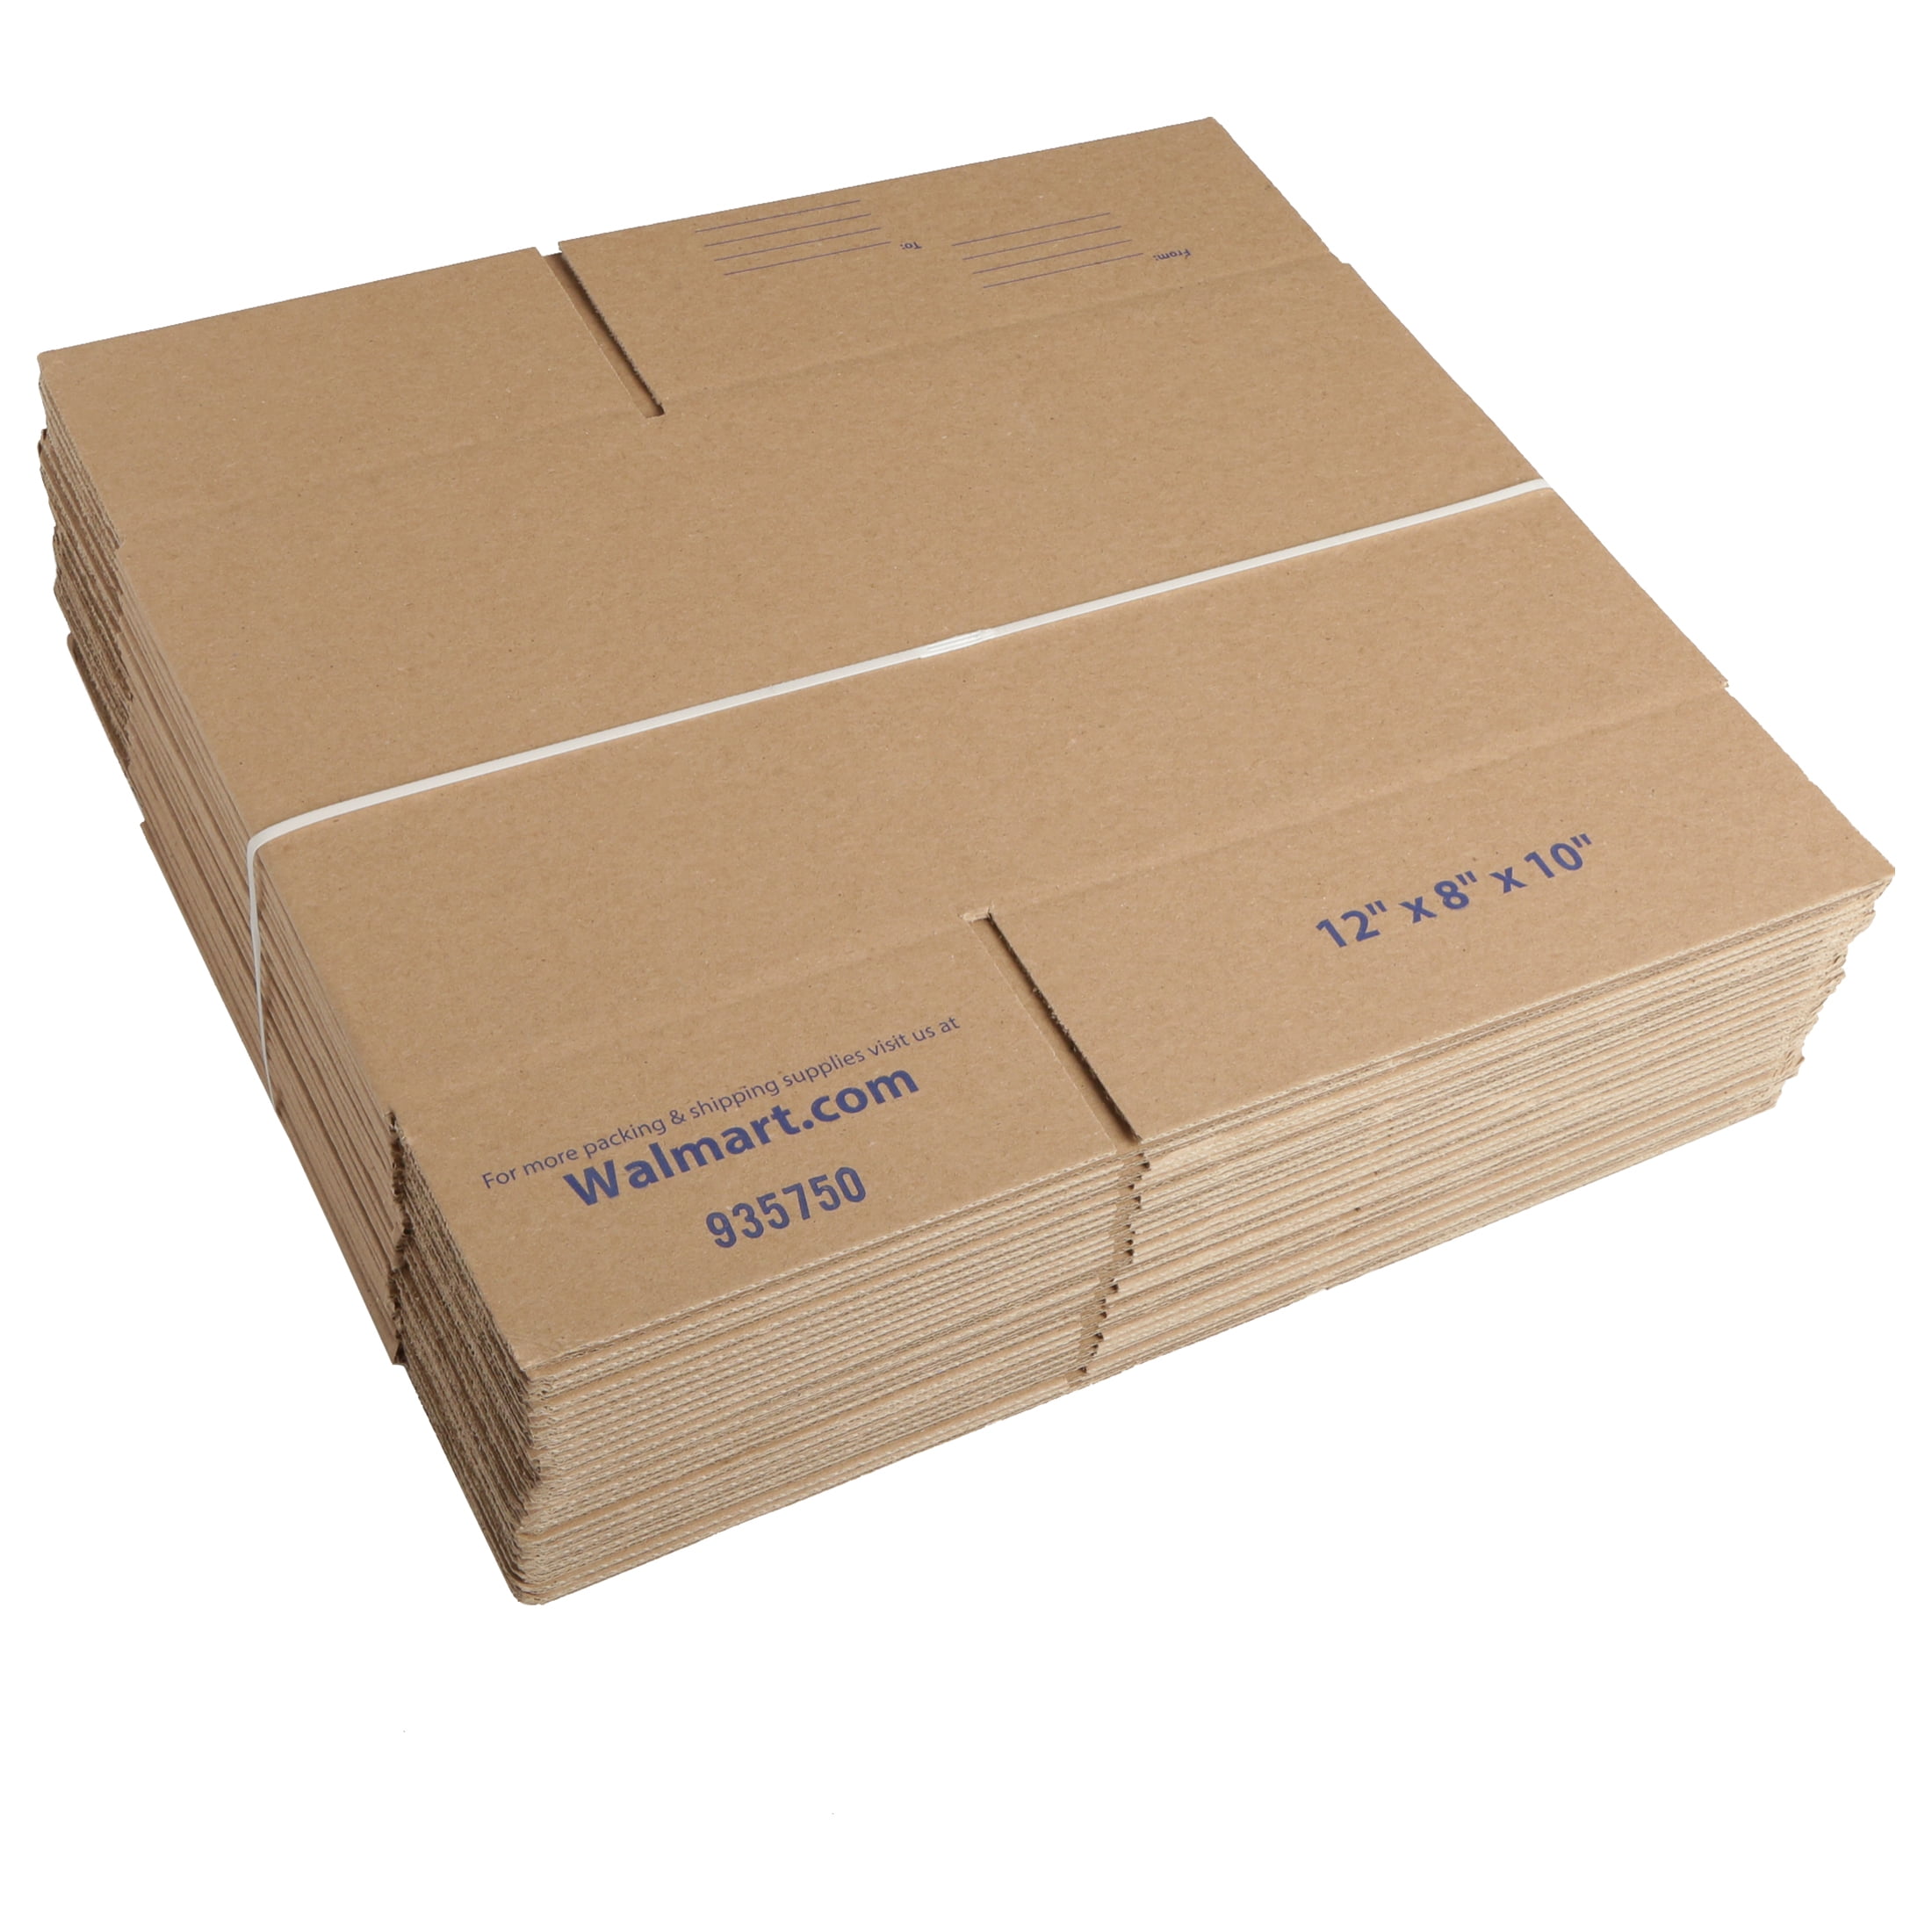 Pen+Gear Recycled Shipping Boxes 12 in. L x 8 in. W x 10 in. H, 30-Count